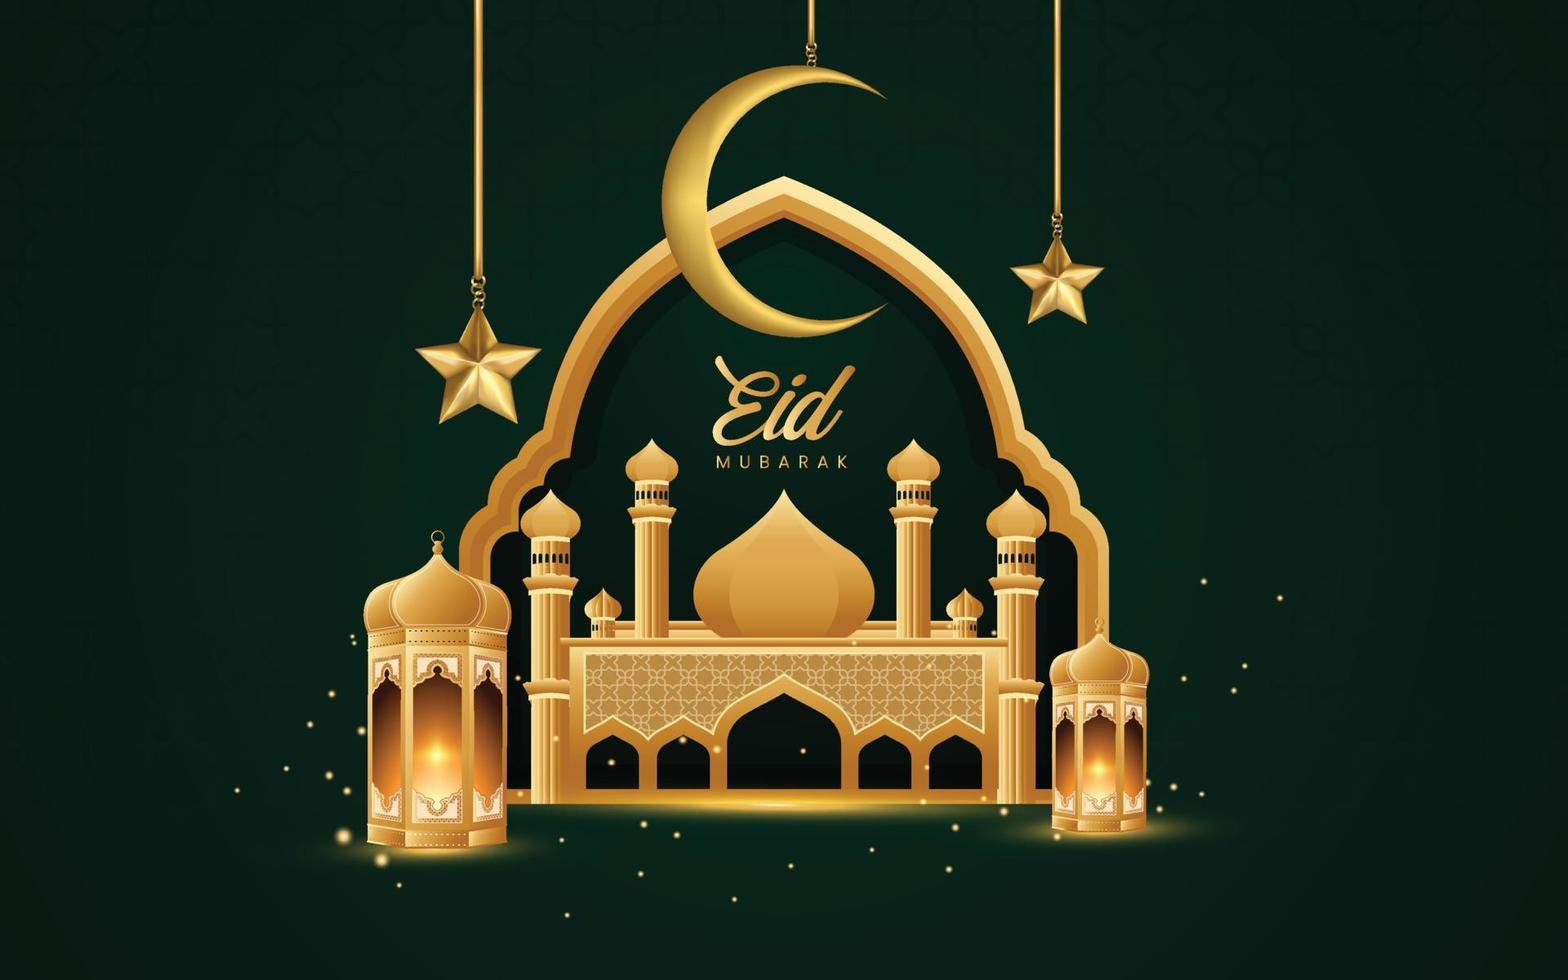 Ramadan Background with Green Color, There are Mosque Shapes, Patterns, and Star and Moon Ornaments that are Suitable for Banners, Header Templates for Websites, and Greeting Cards. vector